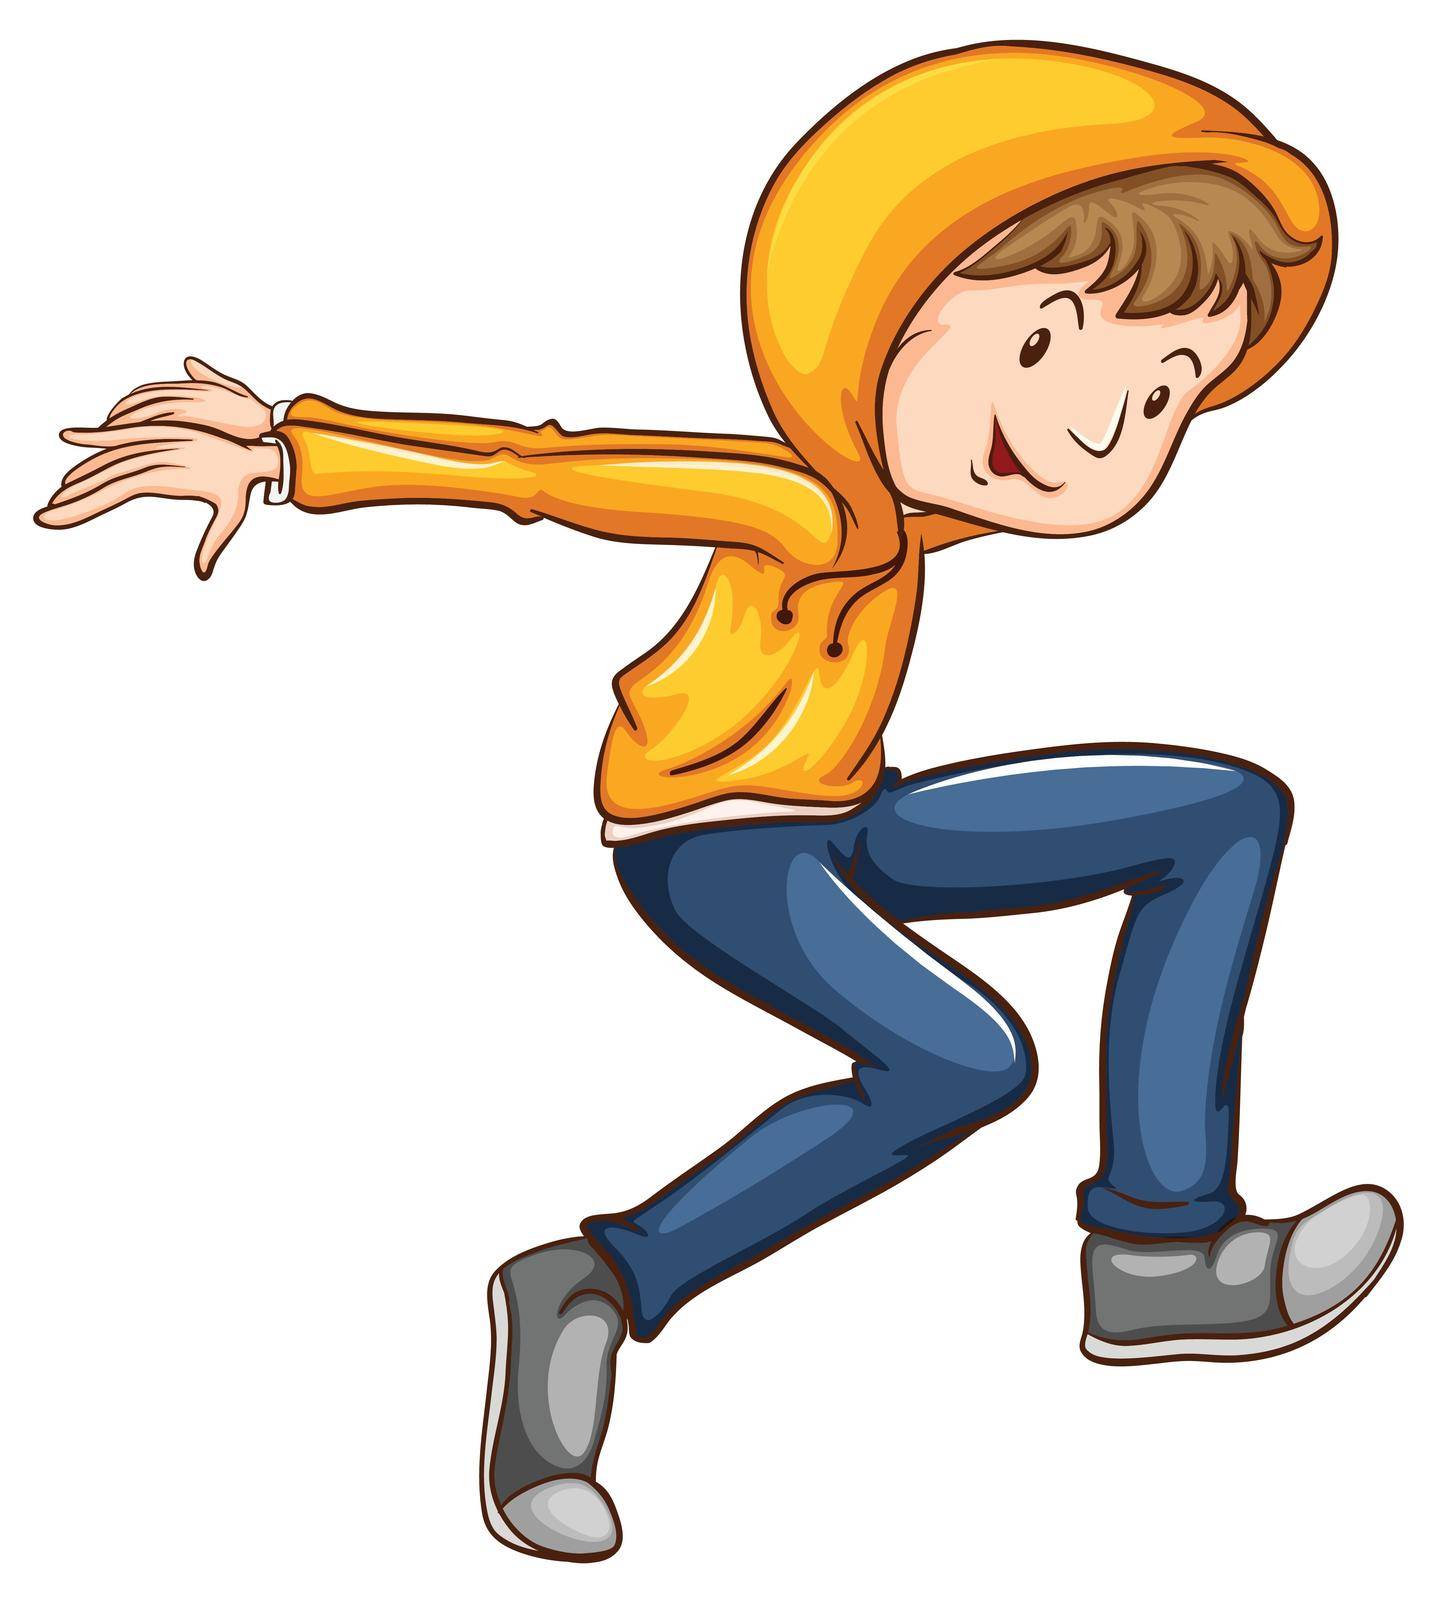 Illustration of a drawing of a dancer with an orange jacket on a white background